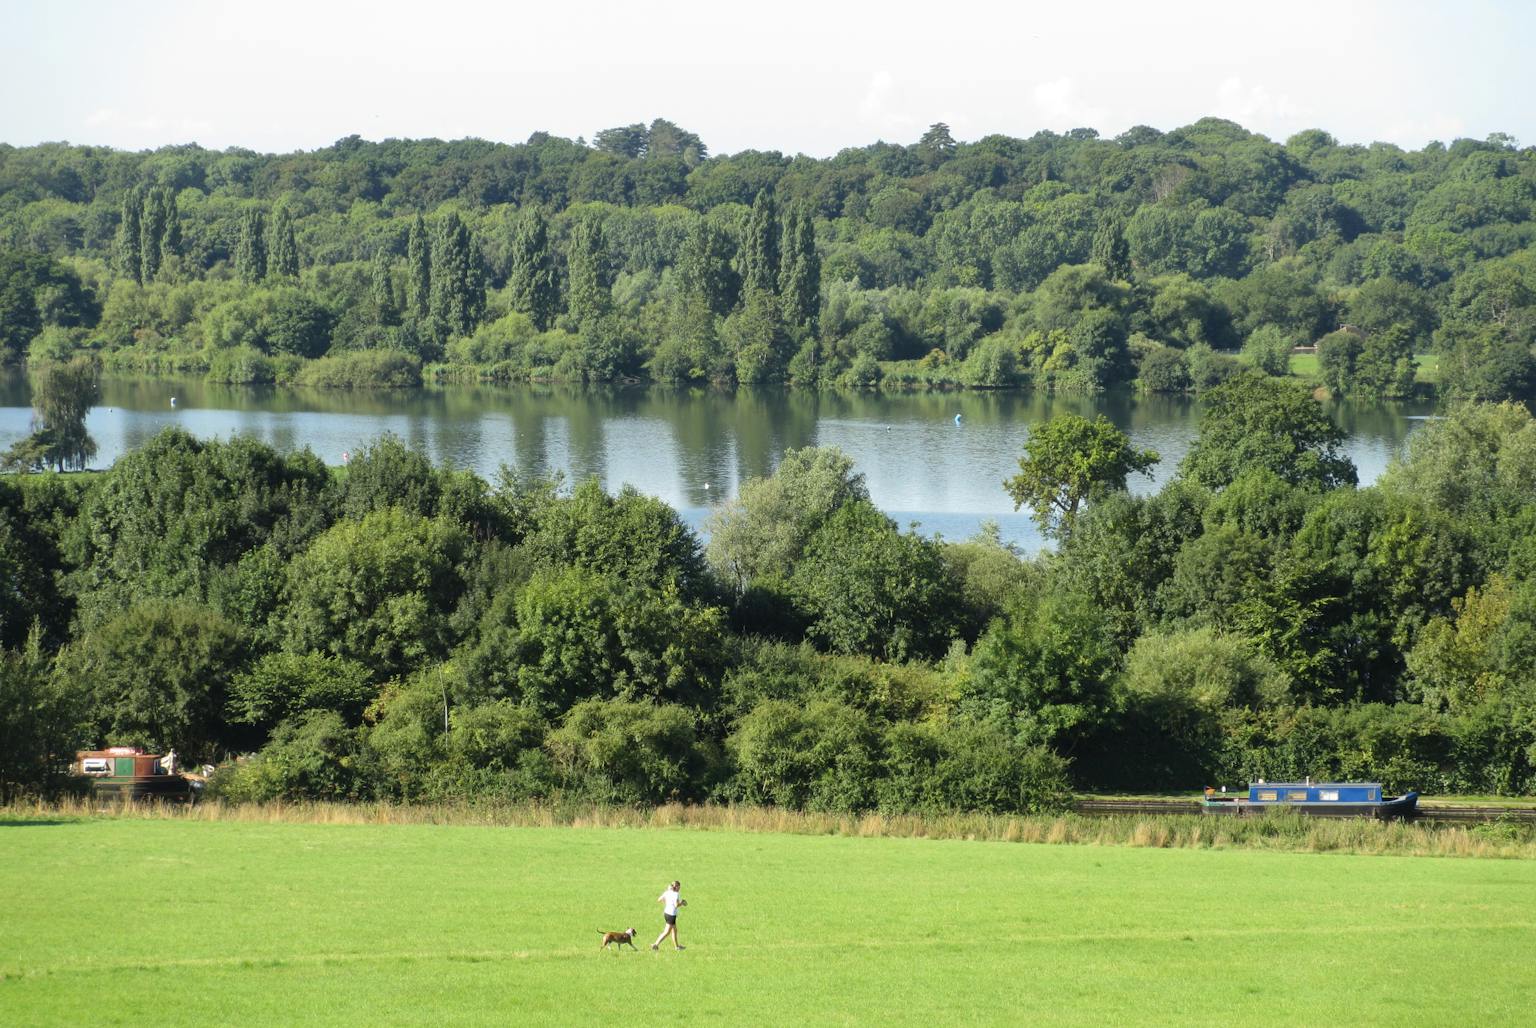 a person walking a dog in a field with trees and a lake